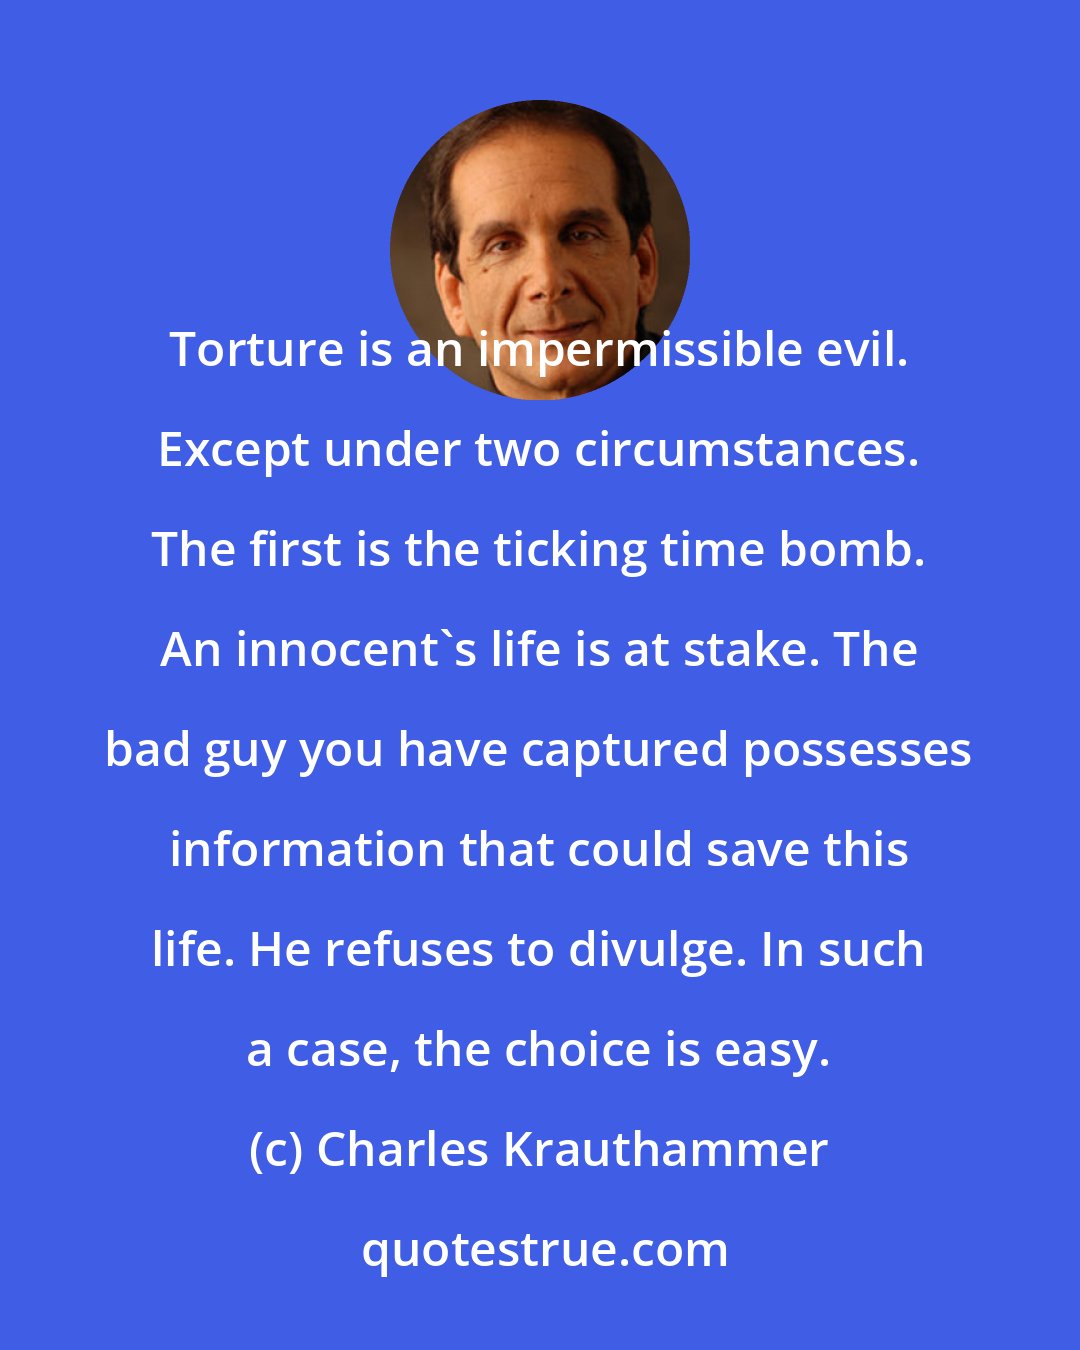 Charles Krauthammer: Torture is an impermissible evil. Except under two circumstances. The first is the ticking time bomb. An innocent's life is at stake. The bad guy you have captured possesses information that could save this life. He refuses to divulge. In such a case, the choice is easy.